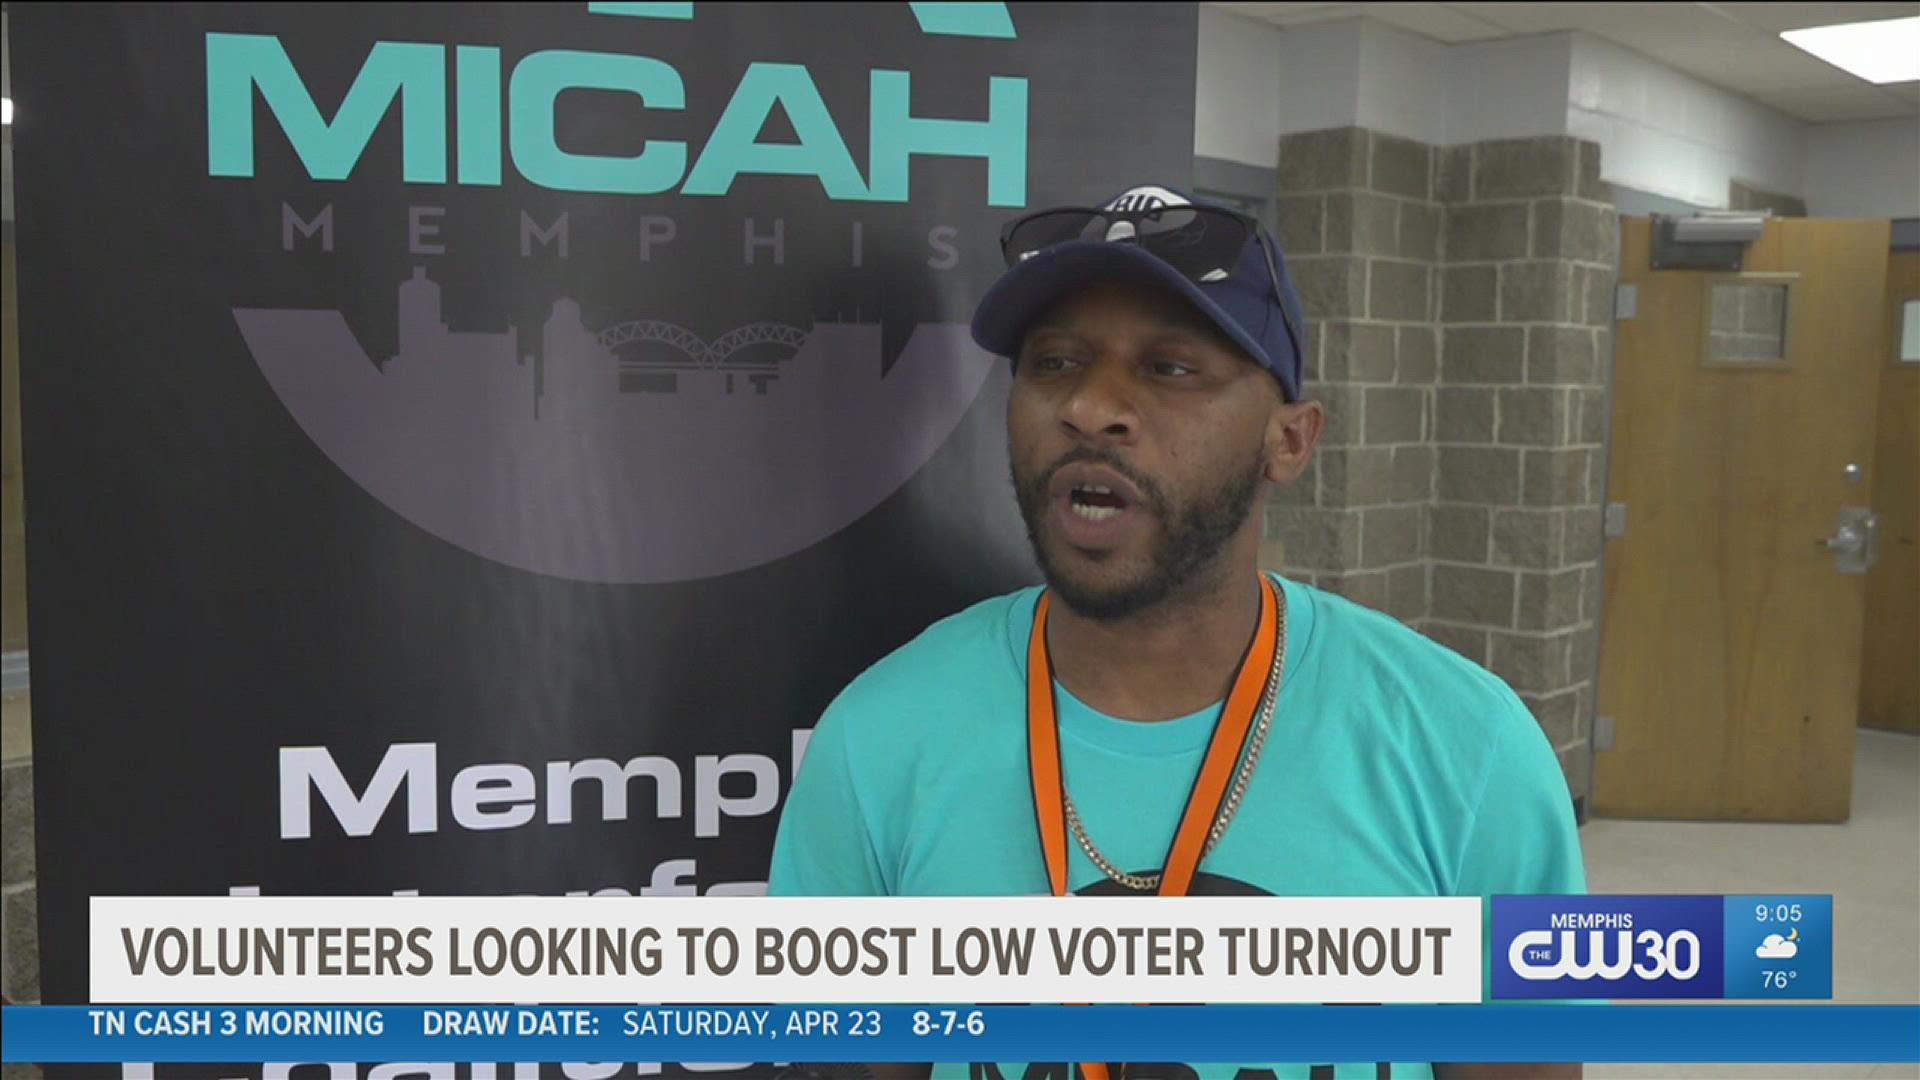 Allen Shropshire, who is a volunteer with the Memphis Interfaith Coalition of Action & Hope, educates people on their voting rights and the justice system.